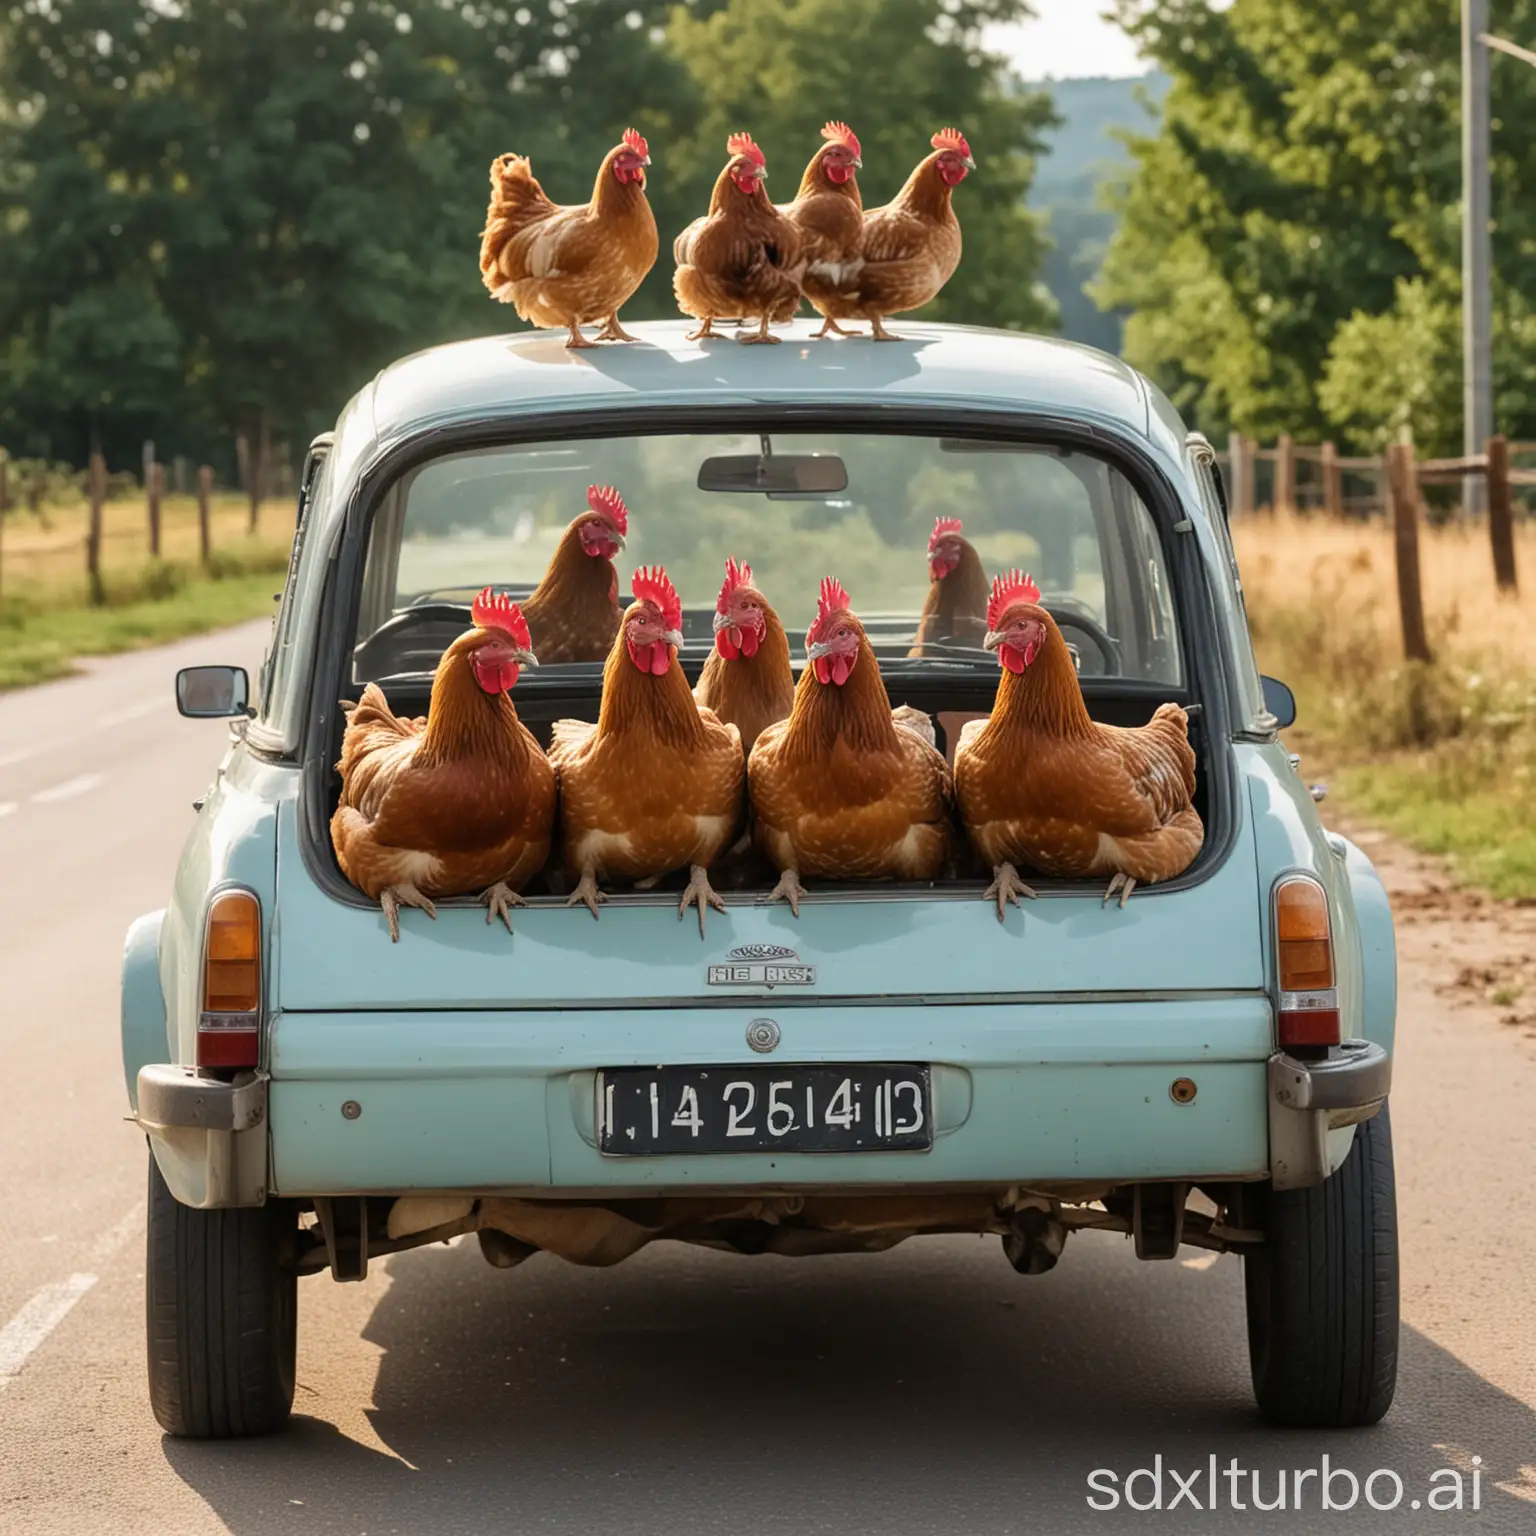 A group of hens is driving a car.